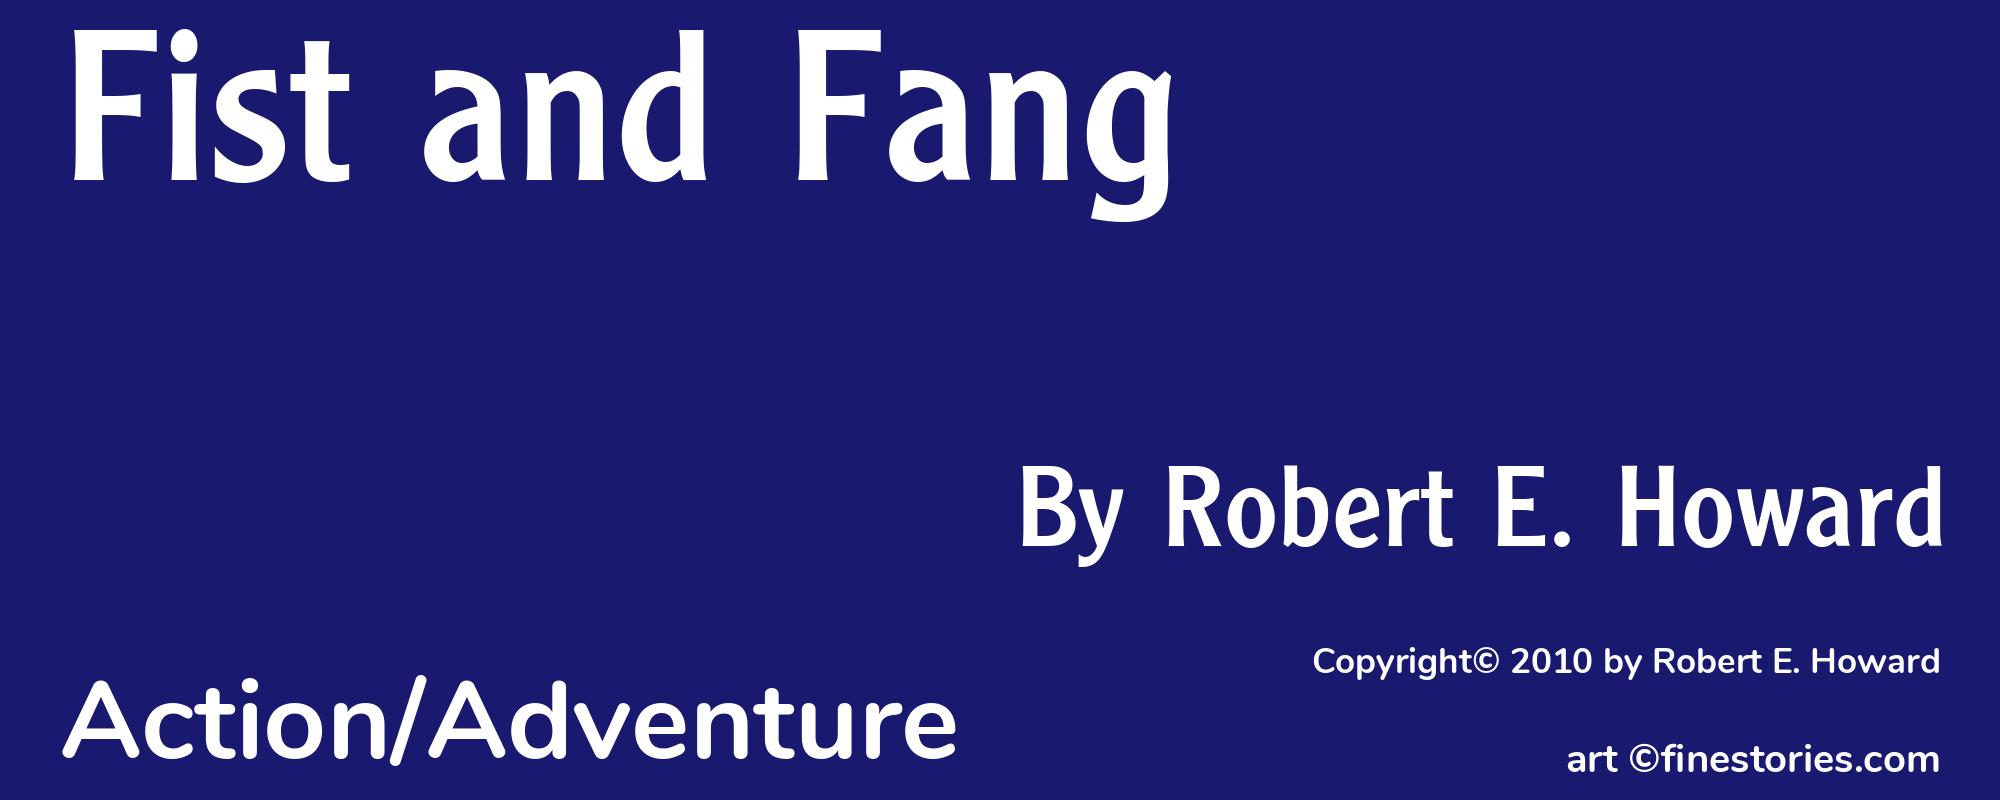 Fist and Fang - Cover